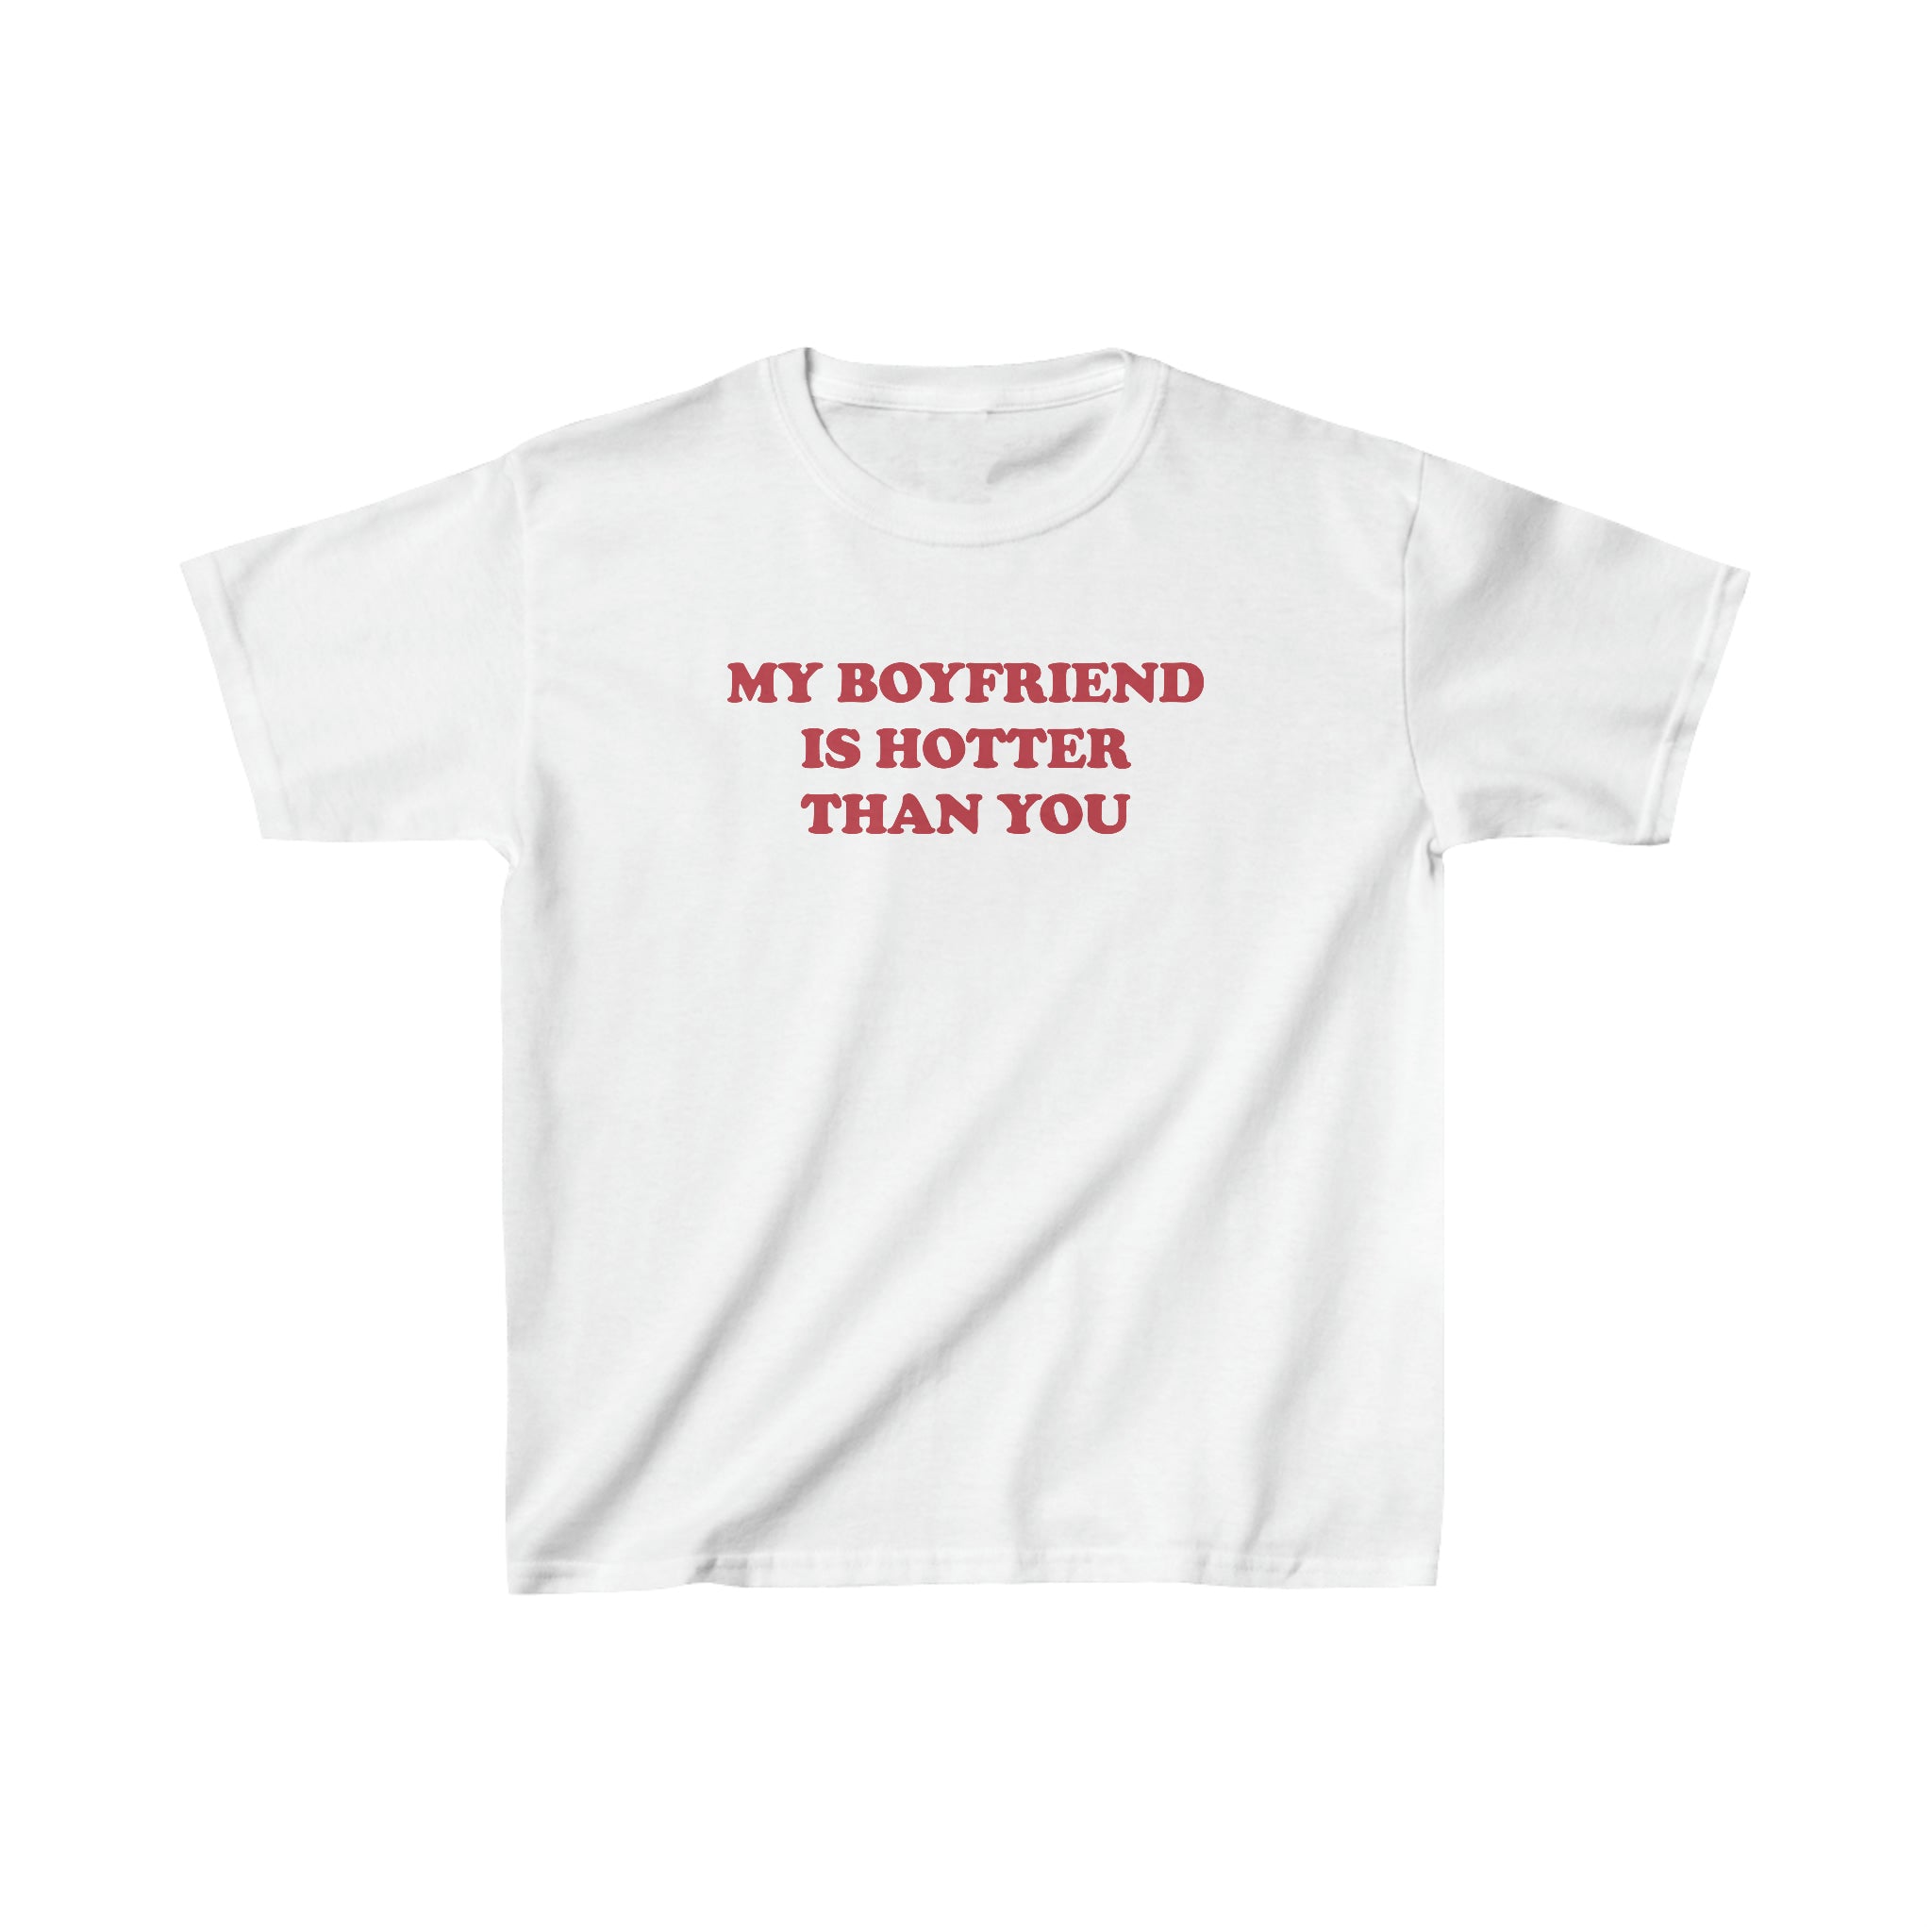 'My Boyfriend is Hotter Than You' baby tee